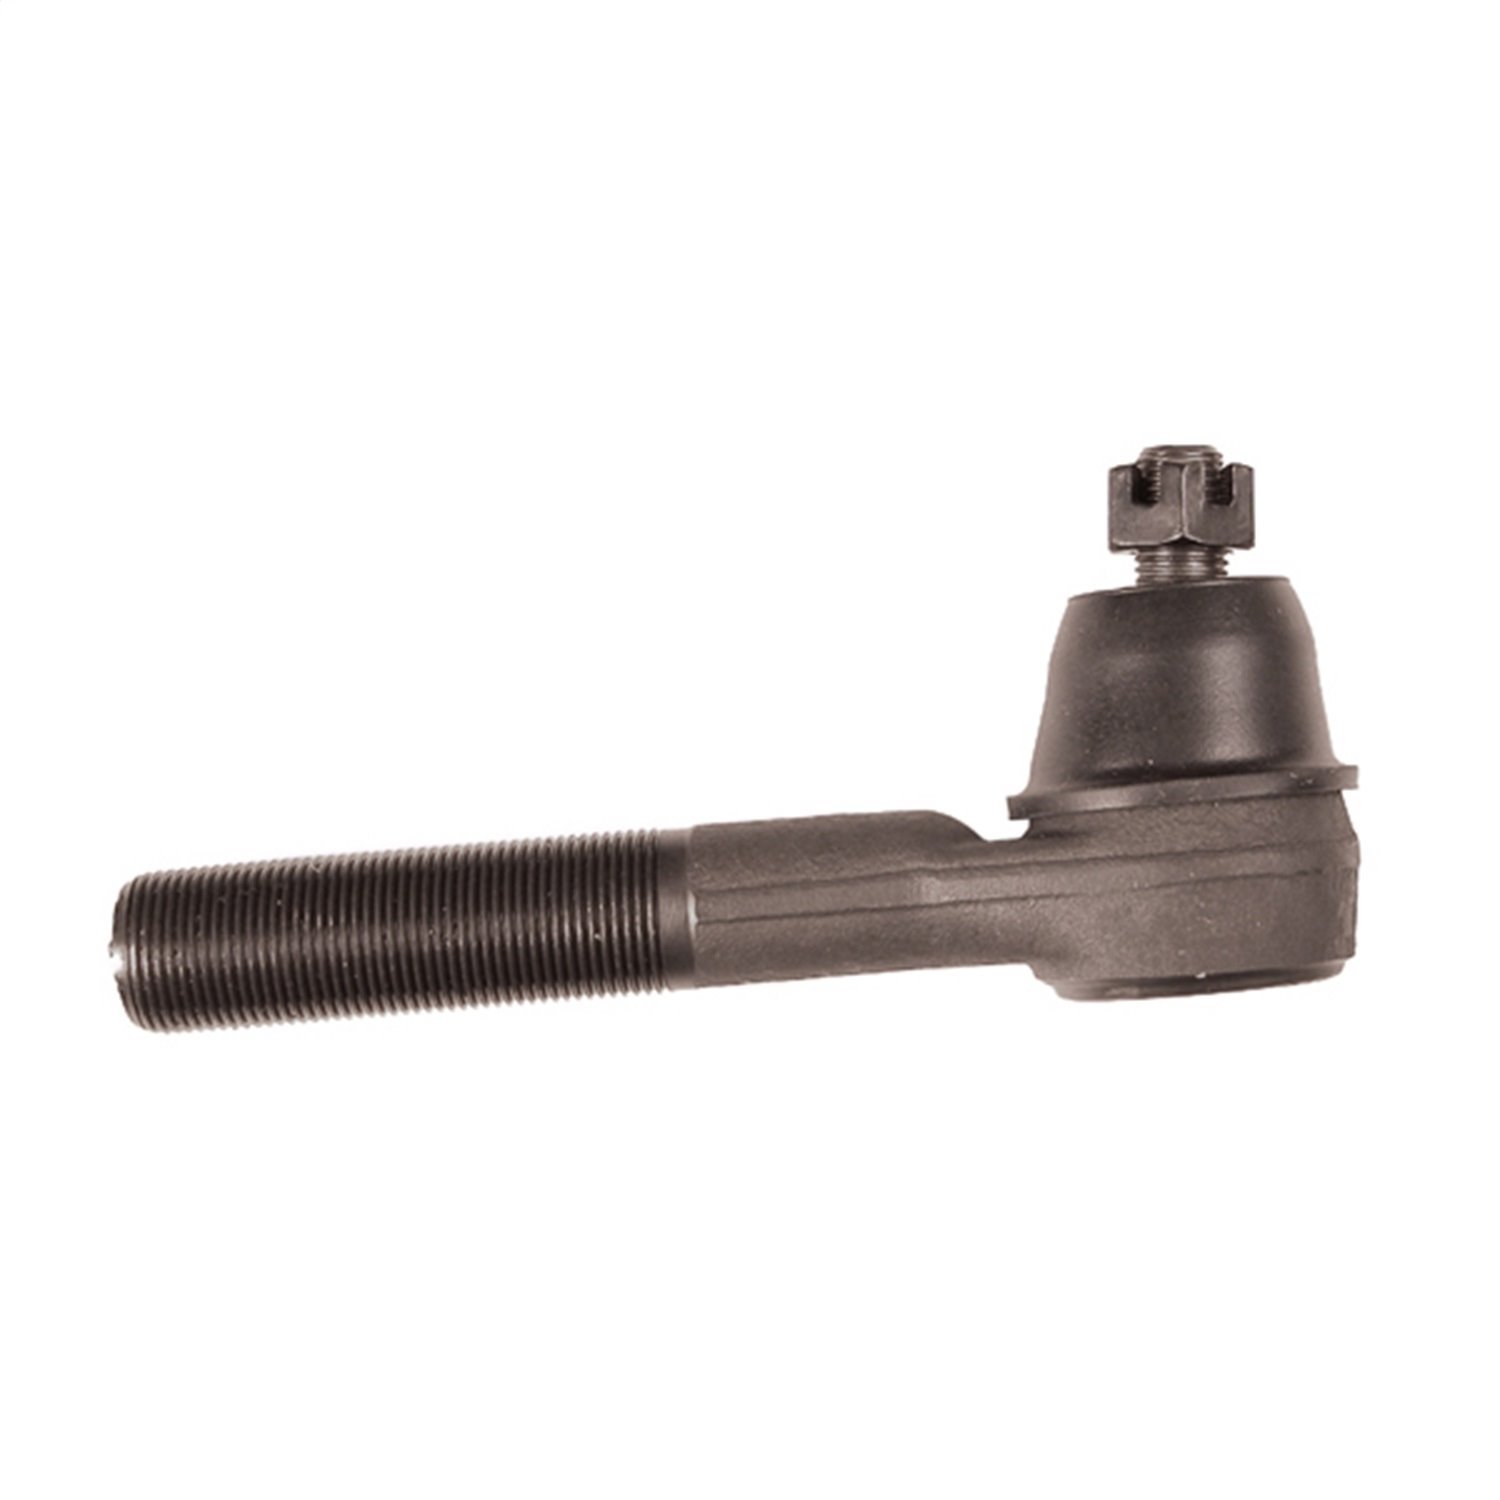 Replacement tie rod end from Omix-ADA, Fits 74-91 Jeep SJ Cherokees and Grand Wagoneers. Left hand thread.